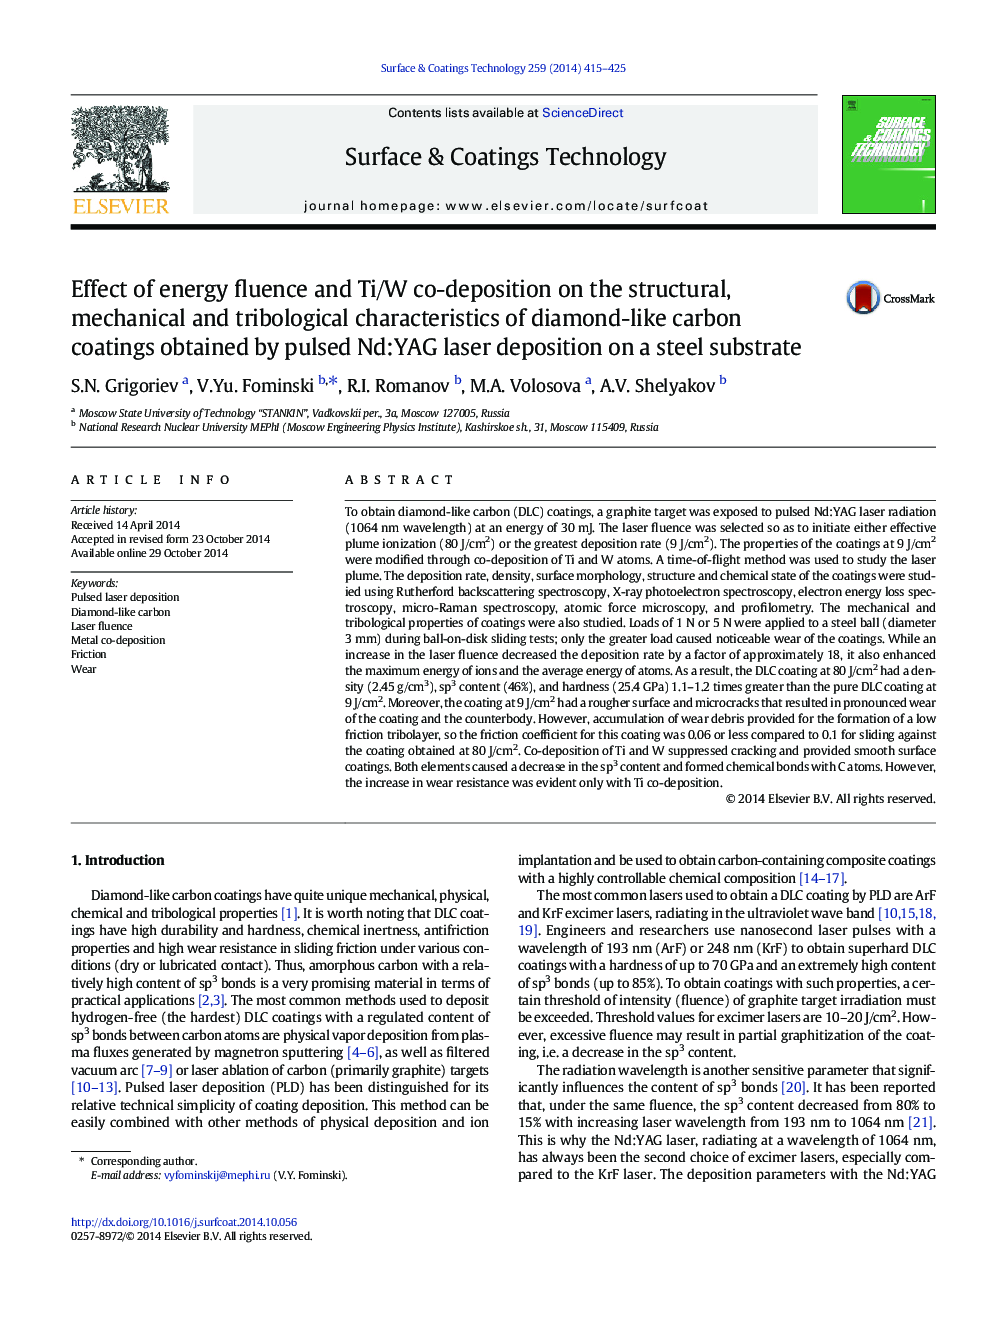 Effect of energy fluence and Ti/W co-deposition on the structural, mechanical and tribological characteristics of diamond-like carbon coatings obtained by pulsed Nd:YAG laser deposition on a steel substrate